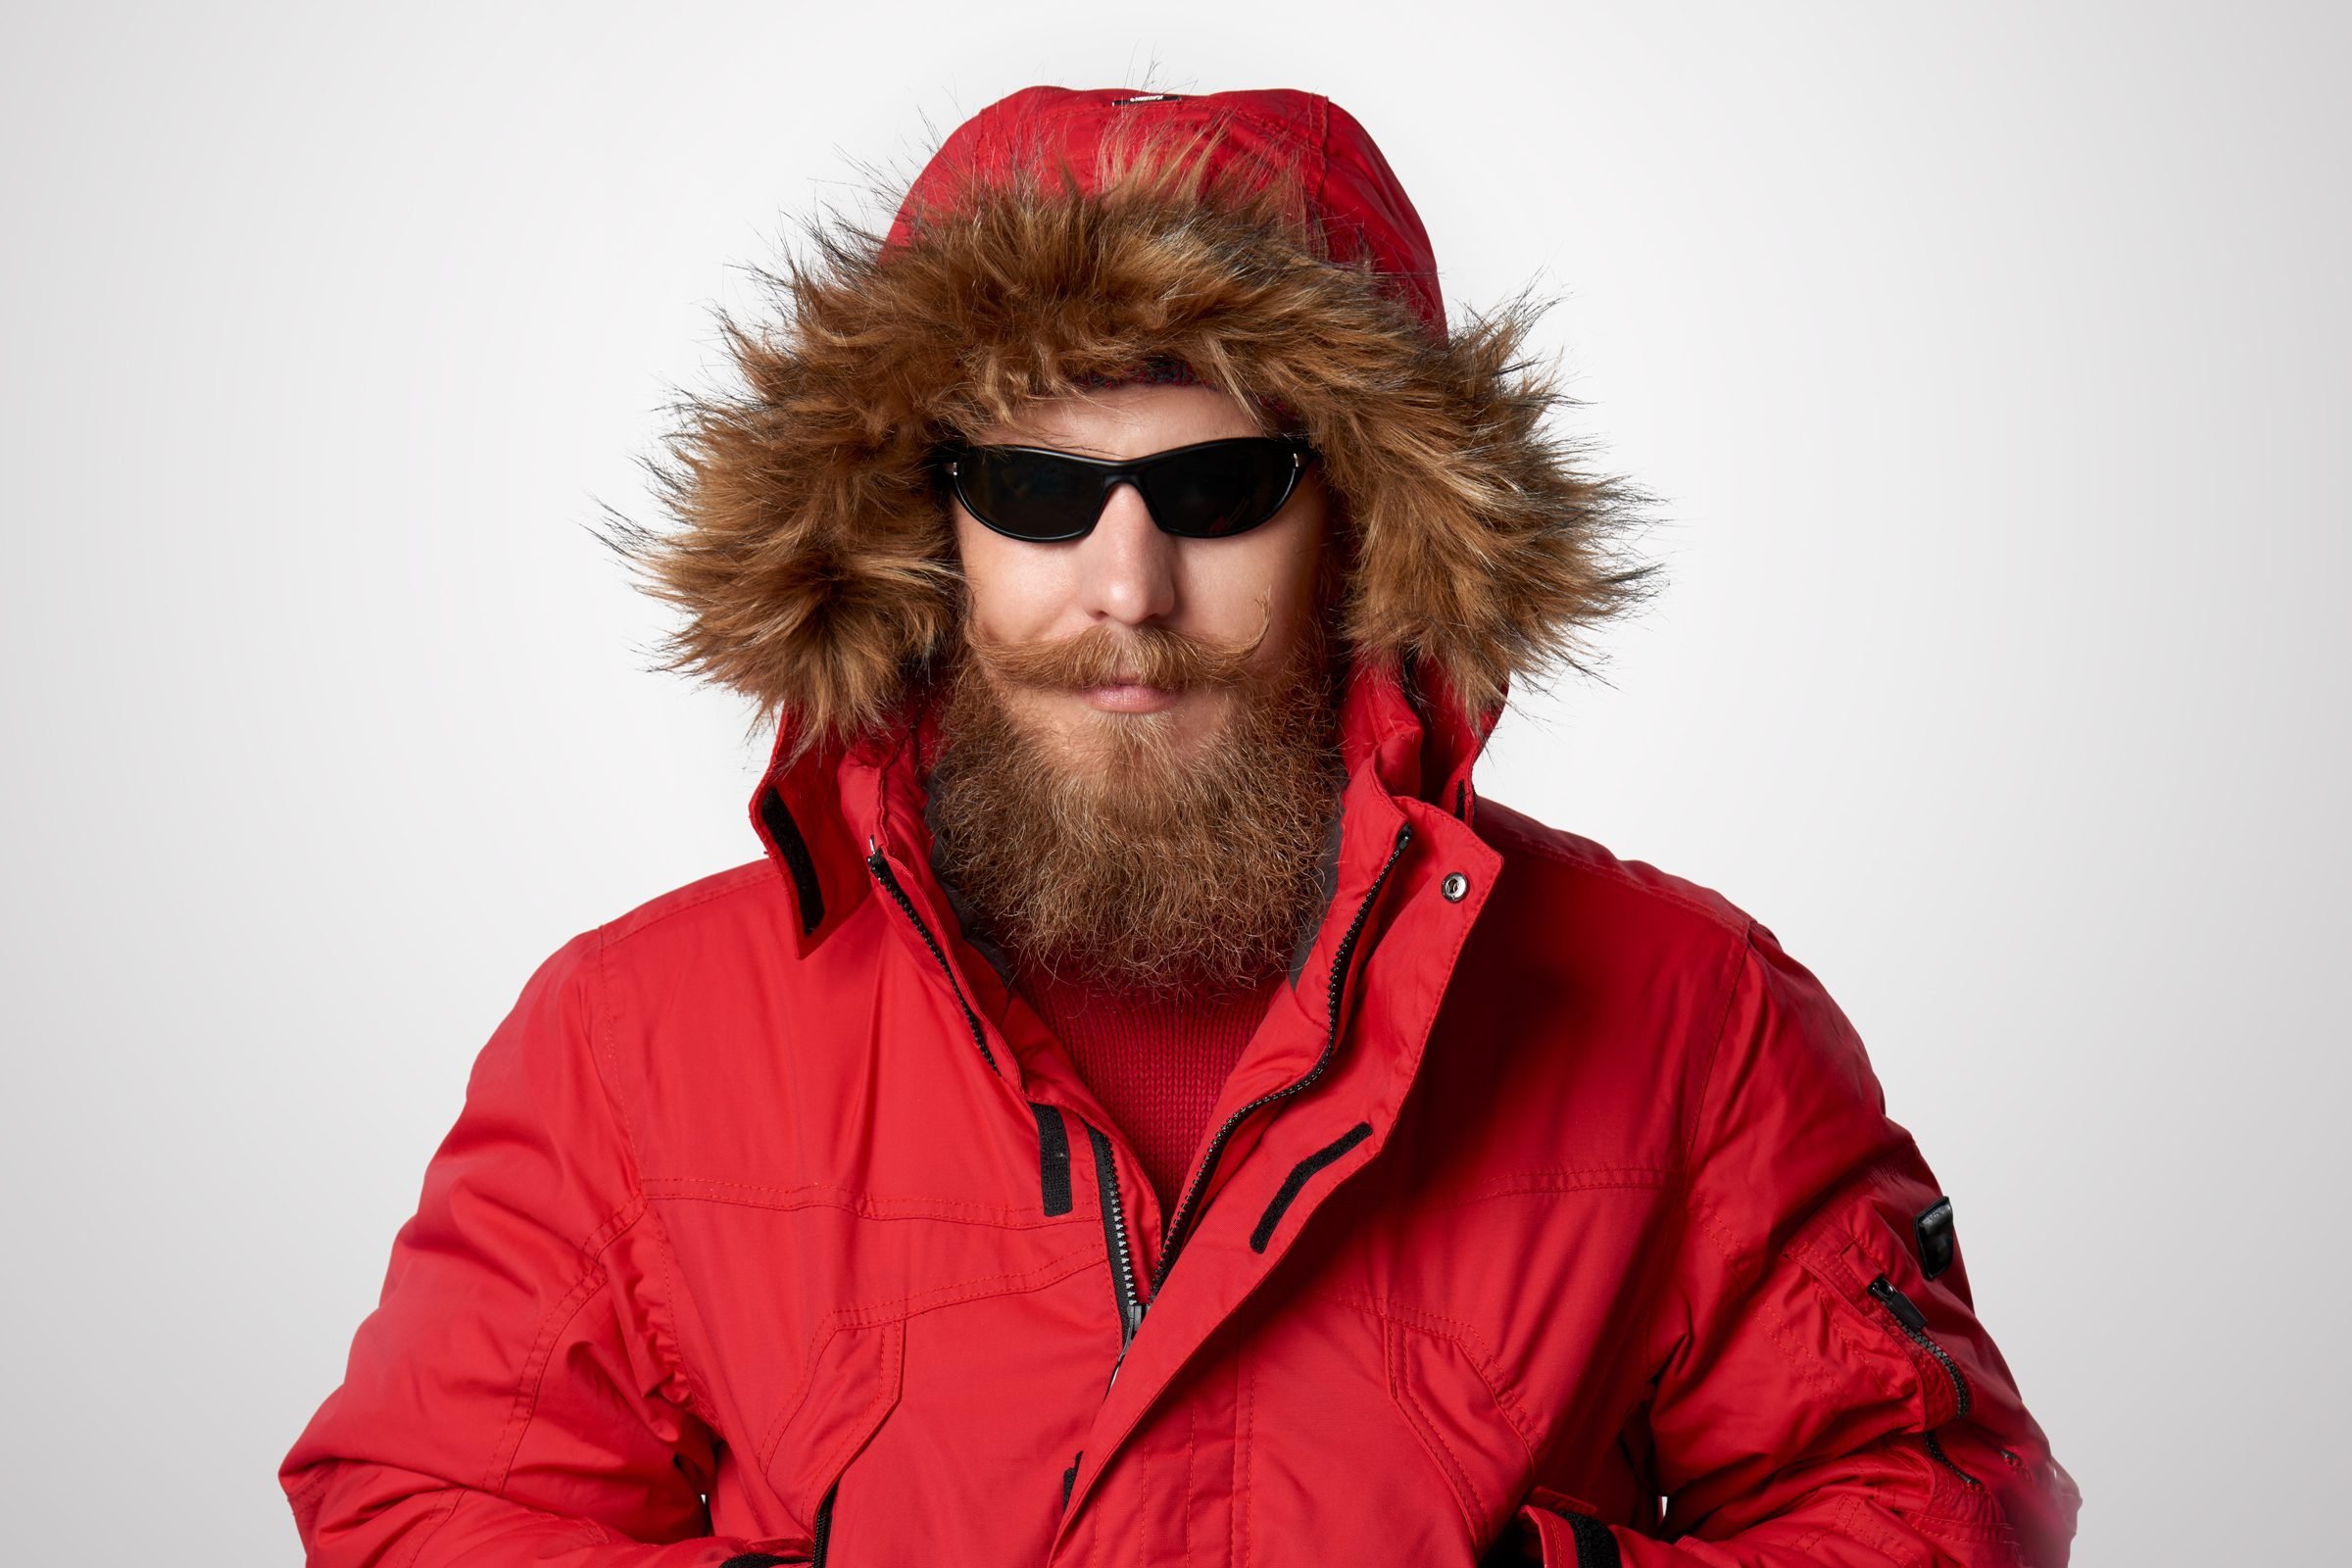 man with a mustache and beard wears sunglasses and a large red winter coat with a fur hood that matches his facial hair